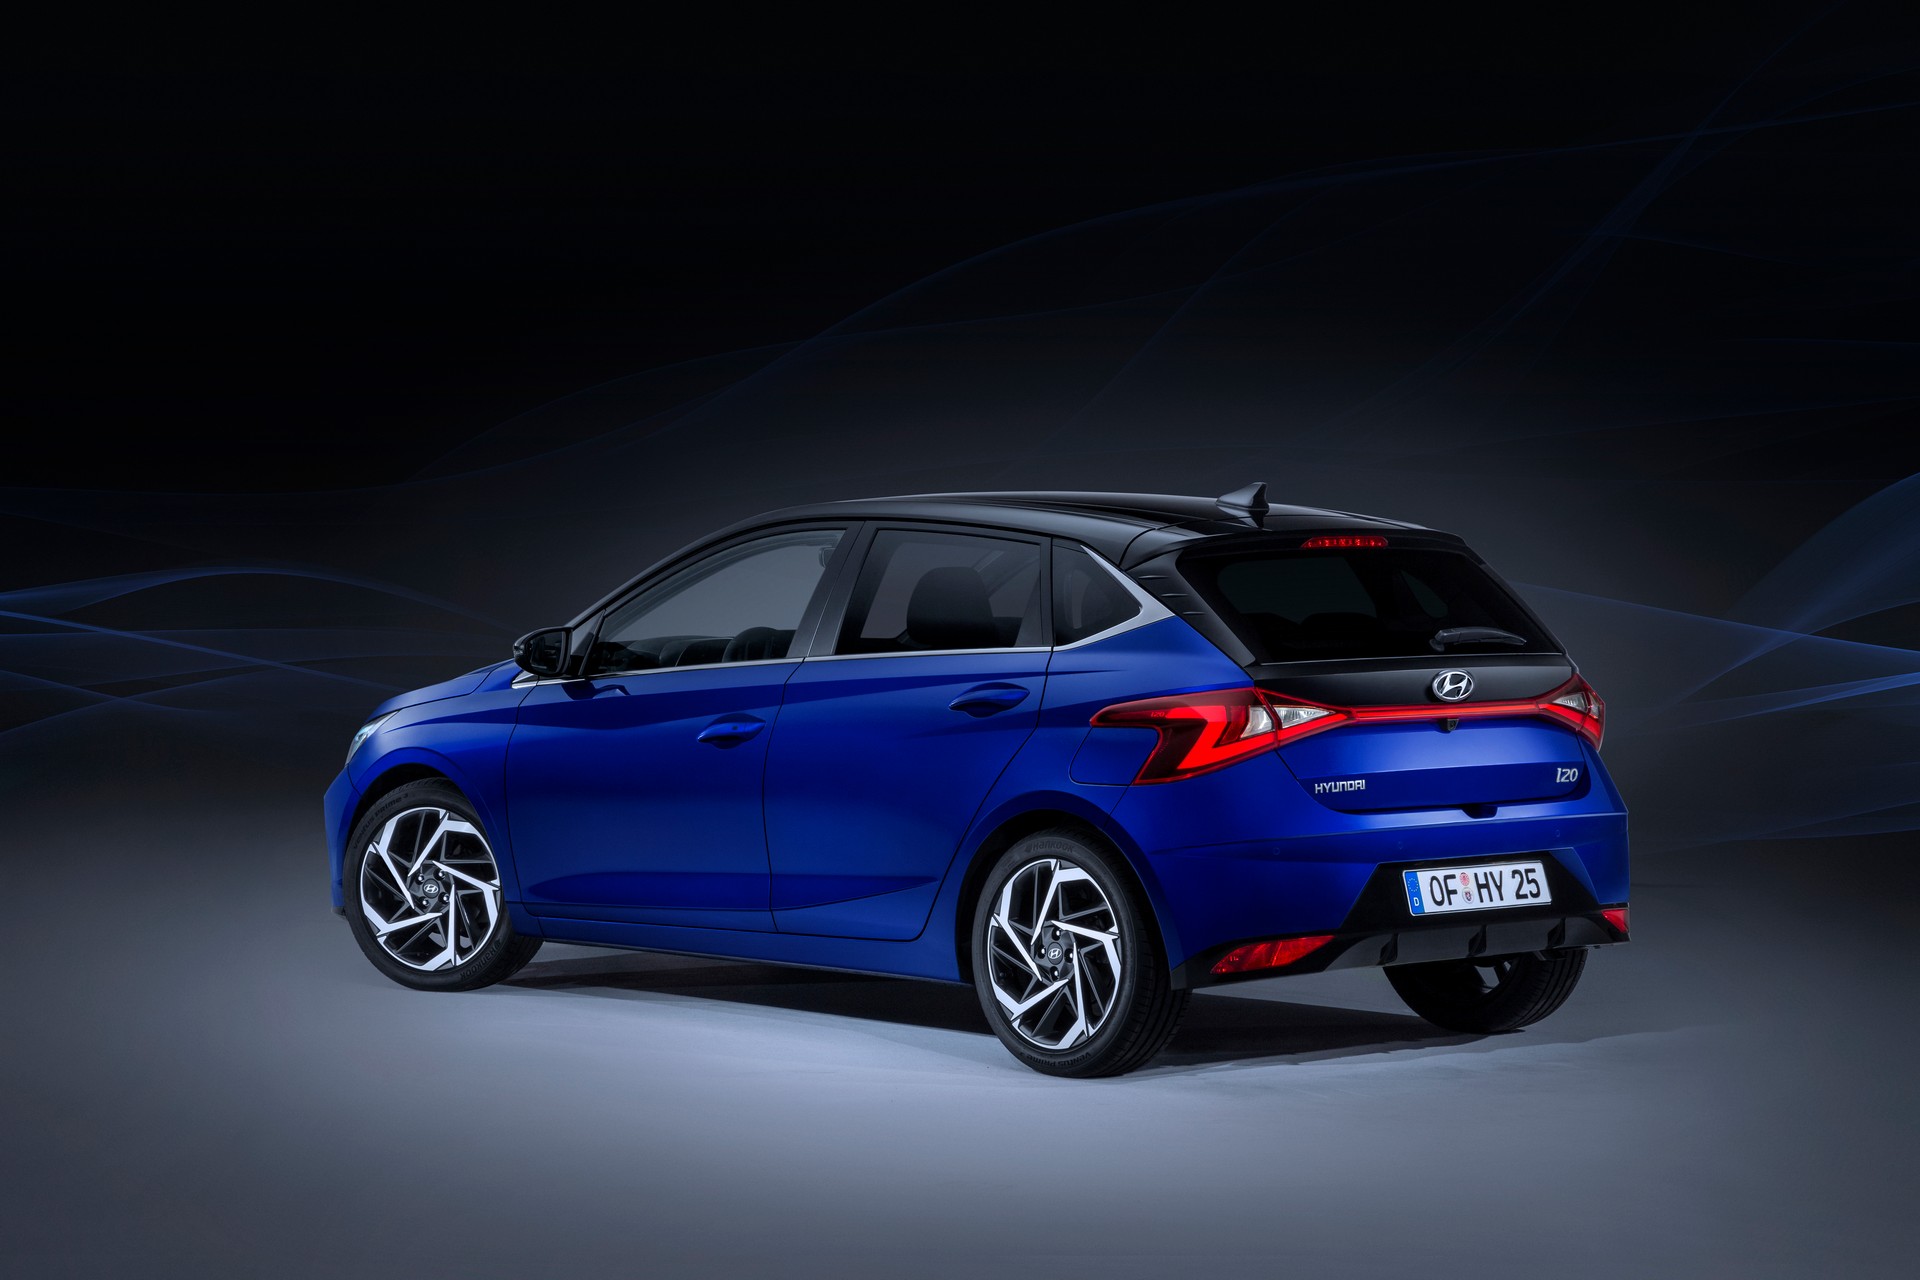 2020 Hyundai i20 Goes Official, Features New Mild Hybrid ...